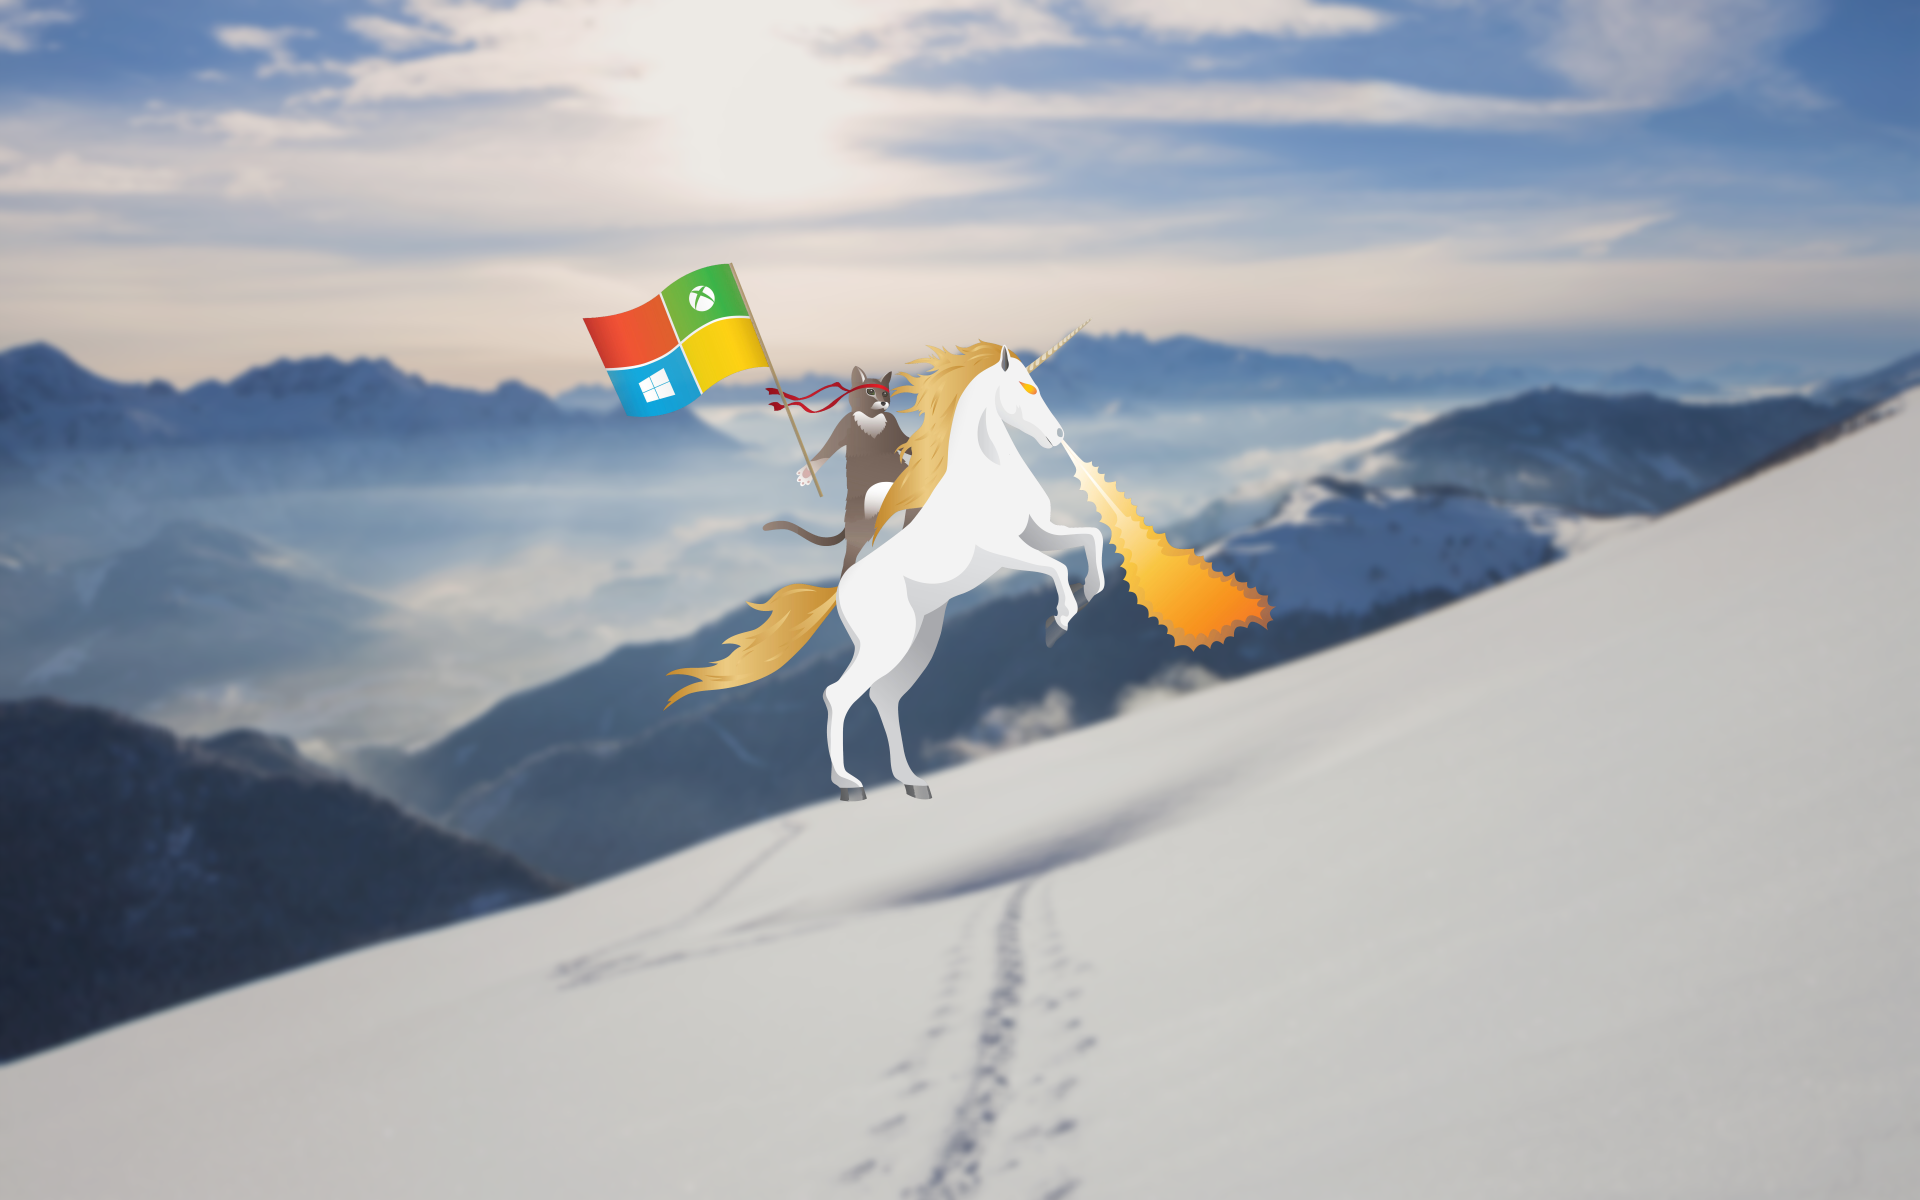 Here are a bunch of Windows 10 Ninja Cat wallpapers   Microsoft News